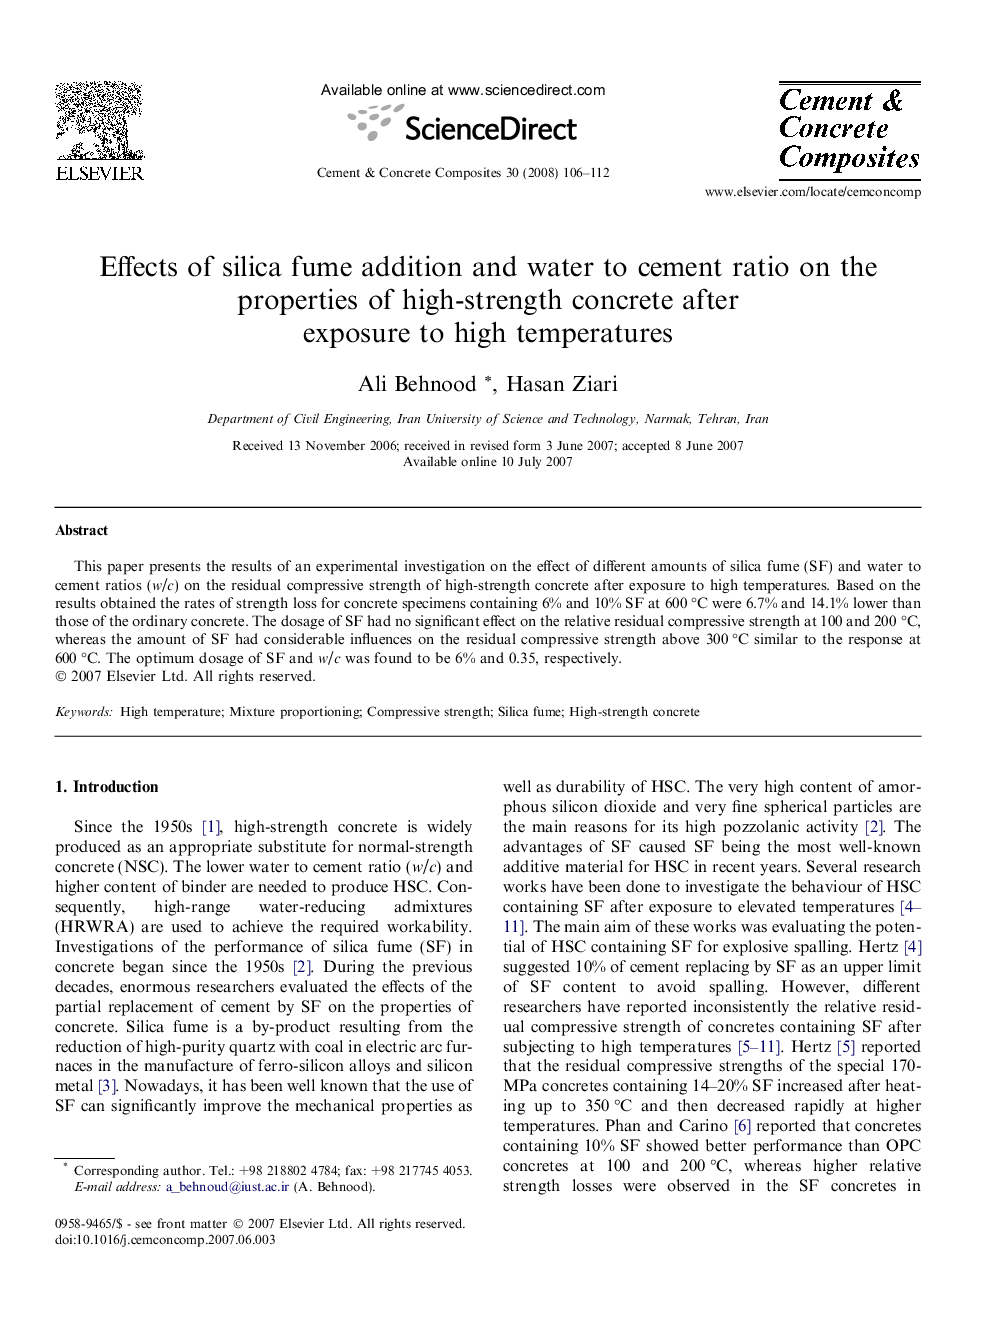 Effects of silica fume addition and water to cement ratio on the properties of high-strength concrete after exposure to high temperatures